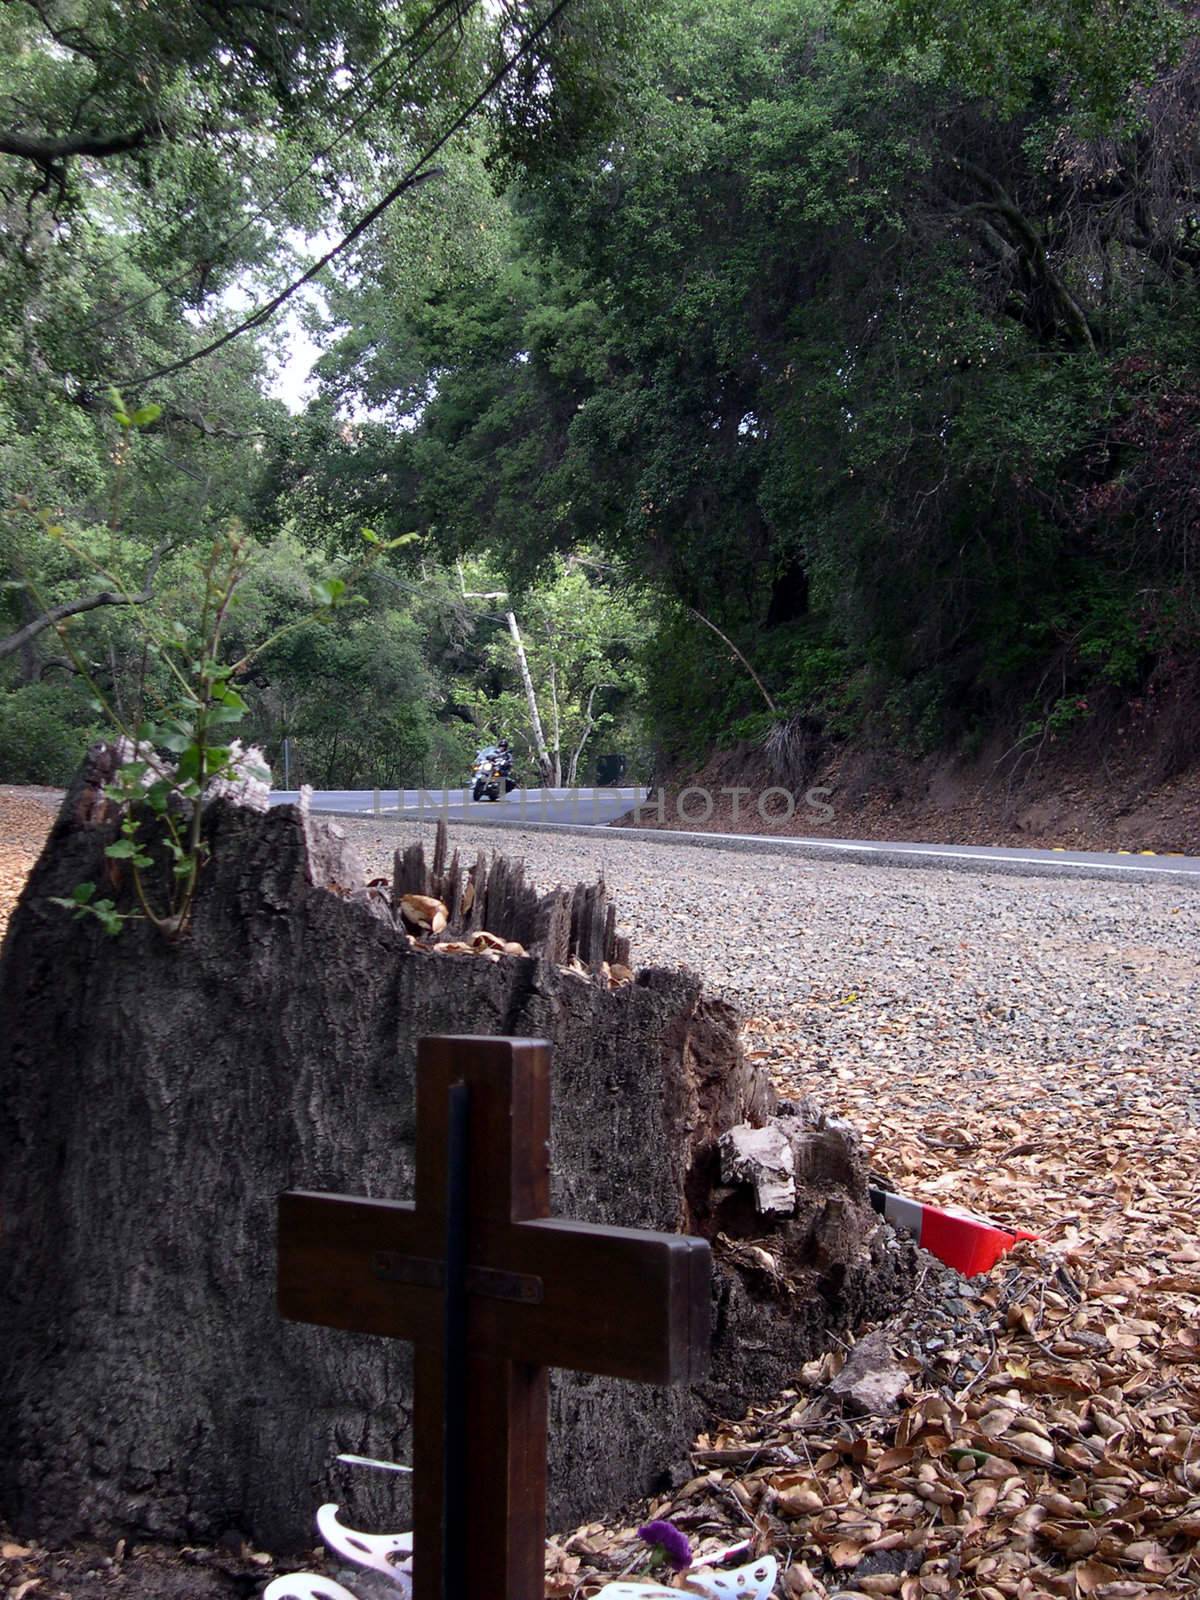 a motorcycle with rider coming around a bend. foreground is a cross, part of a memorial for motorcycle accident victims at that turn.